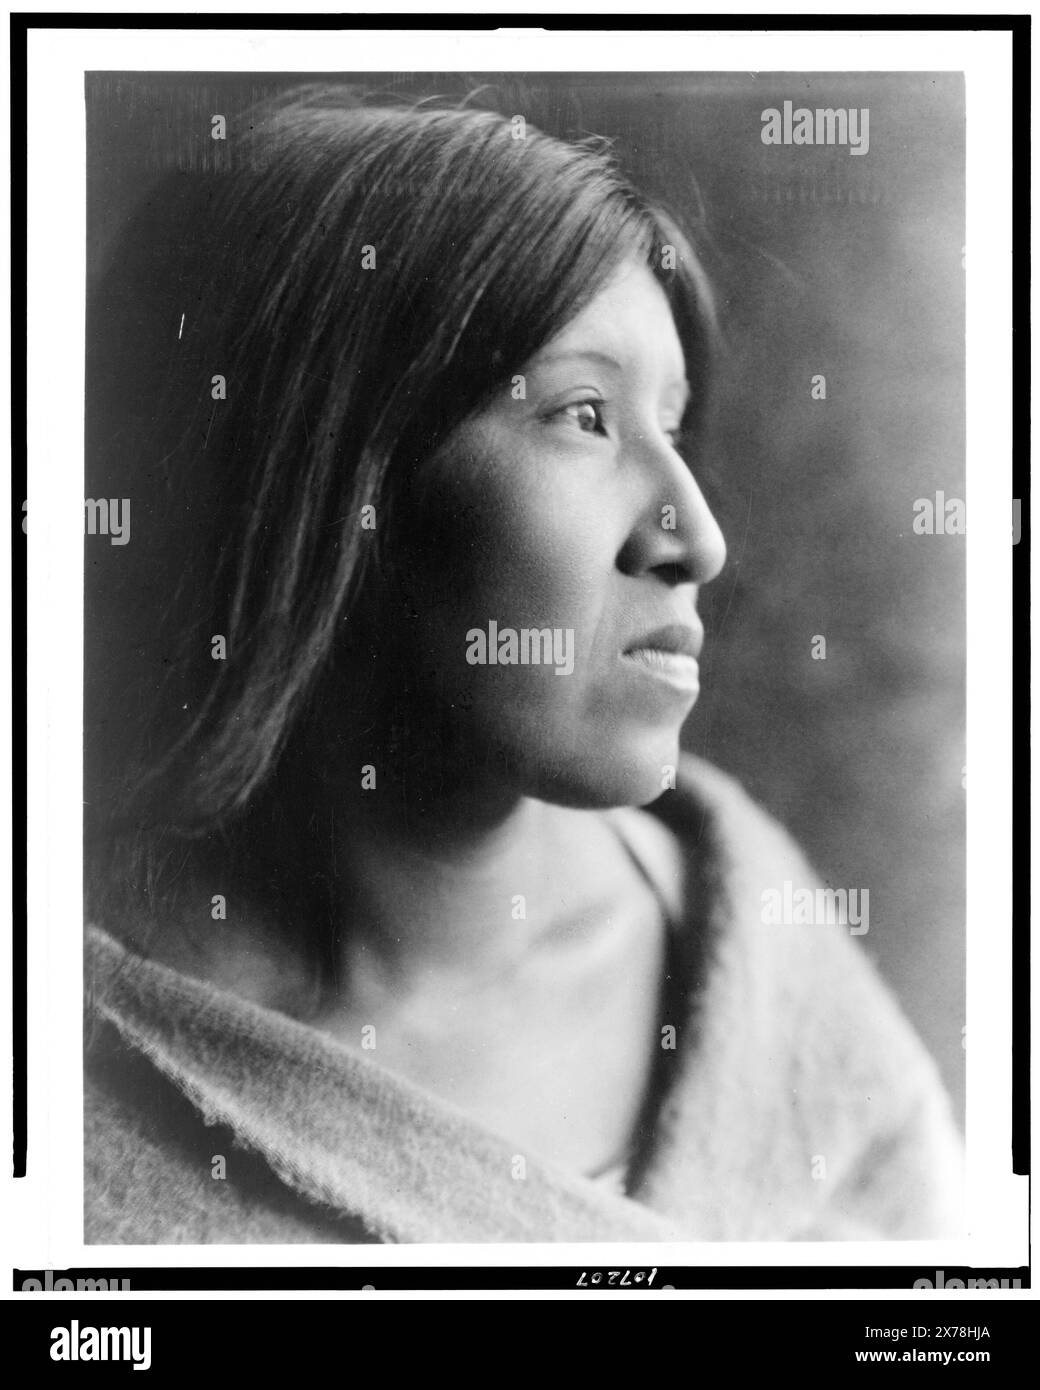 A Desert Cahuilla woman, head-and-shoulders portrait, facing right, Edward S. Curtis Collection., Curtis no. 4154., Published in: The North American Indian / Edward S. Curtis. [Seattle, Wash.] : Edward S. Curtis, 1907-30 Suppl., v. 15, pl. 522.. Indians of North America, Women, 1920-1930. , Cahuilla Indians, Women, 1920-1930. Stock Photo